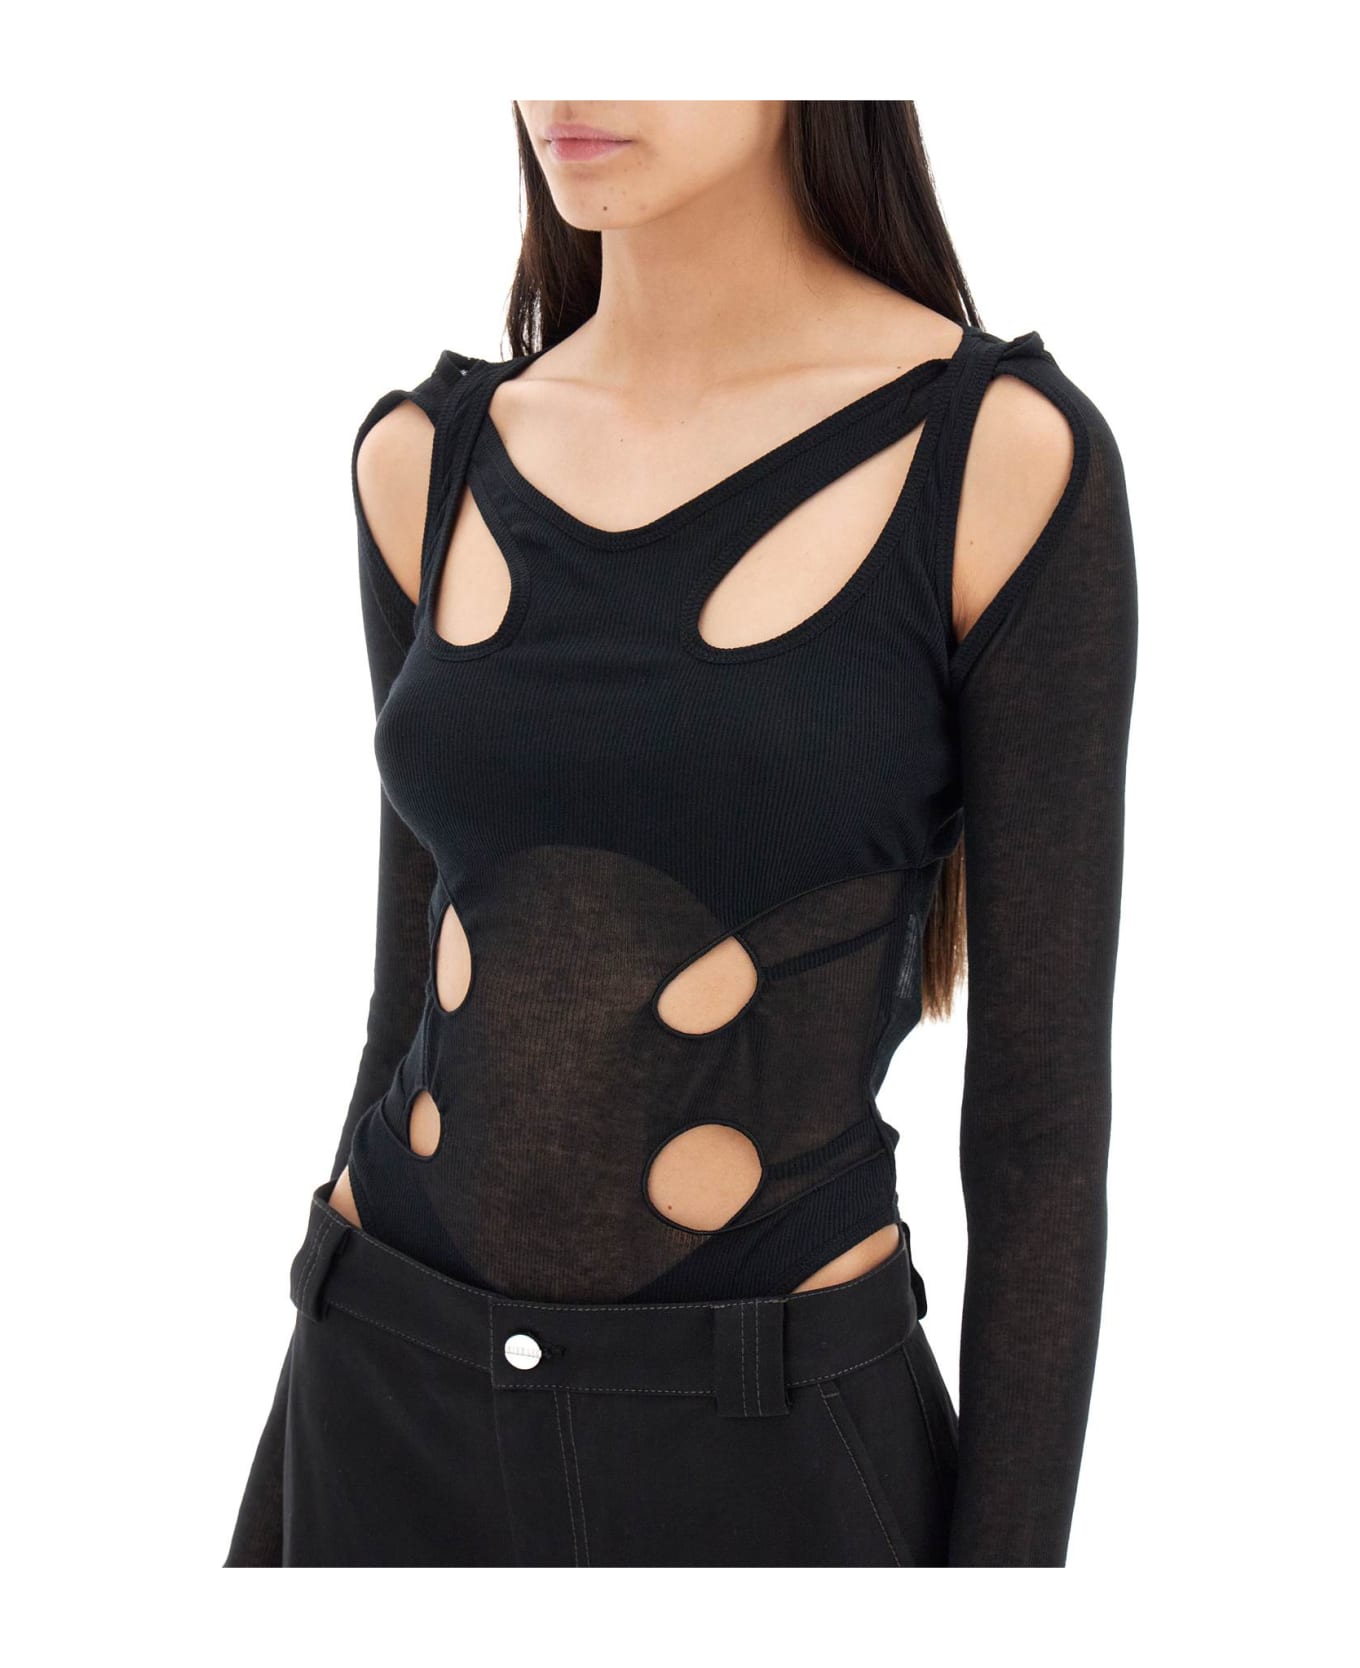 Dion Lee Long-sleeved Bodysuit With Cut-outs - BLACK (Black) ボディスーツ